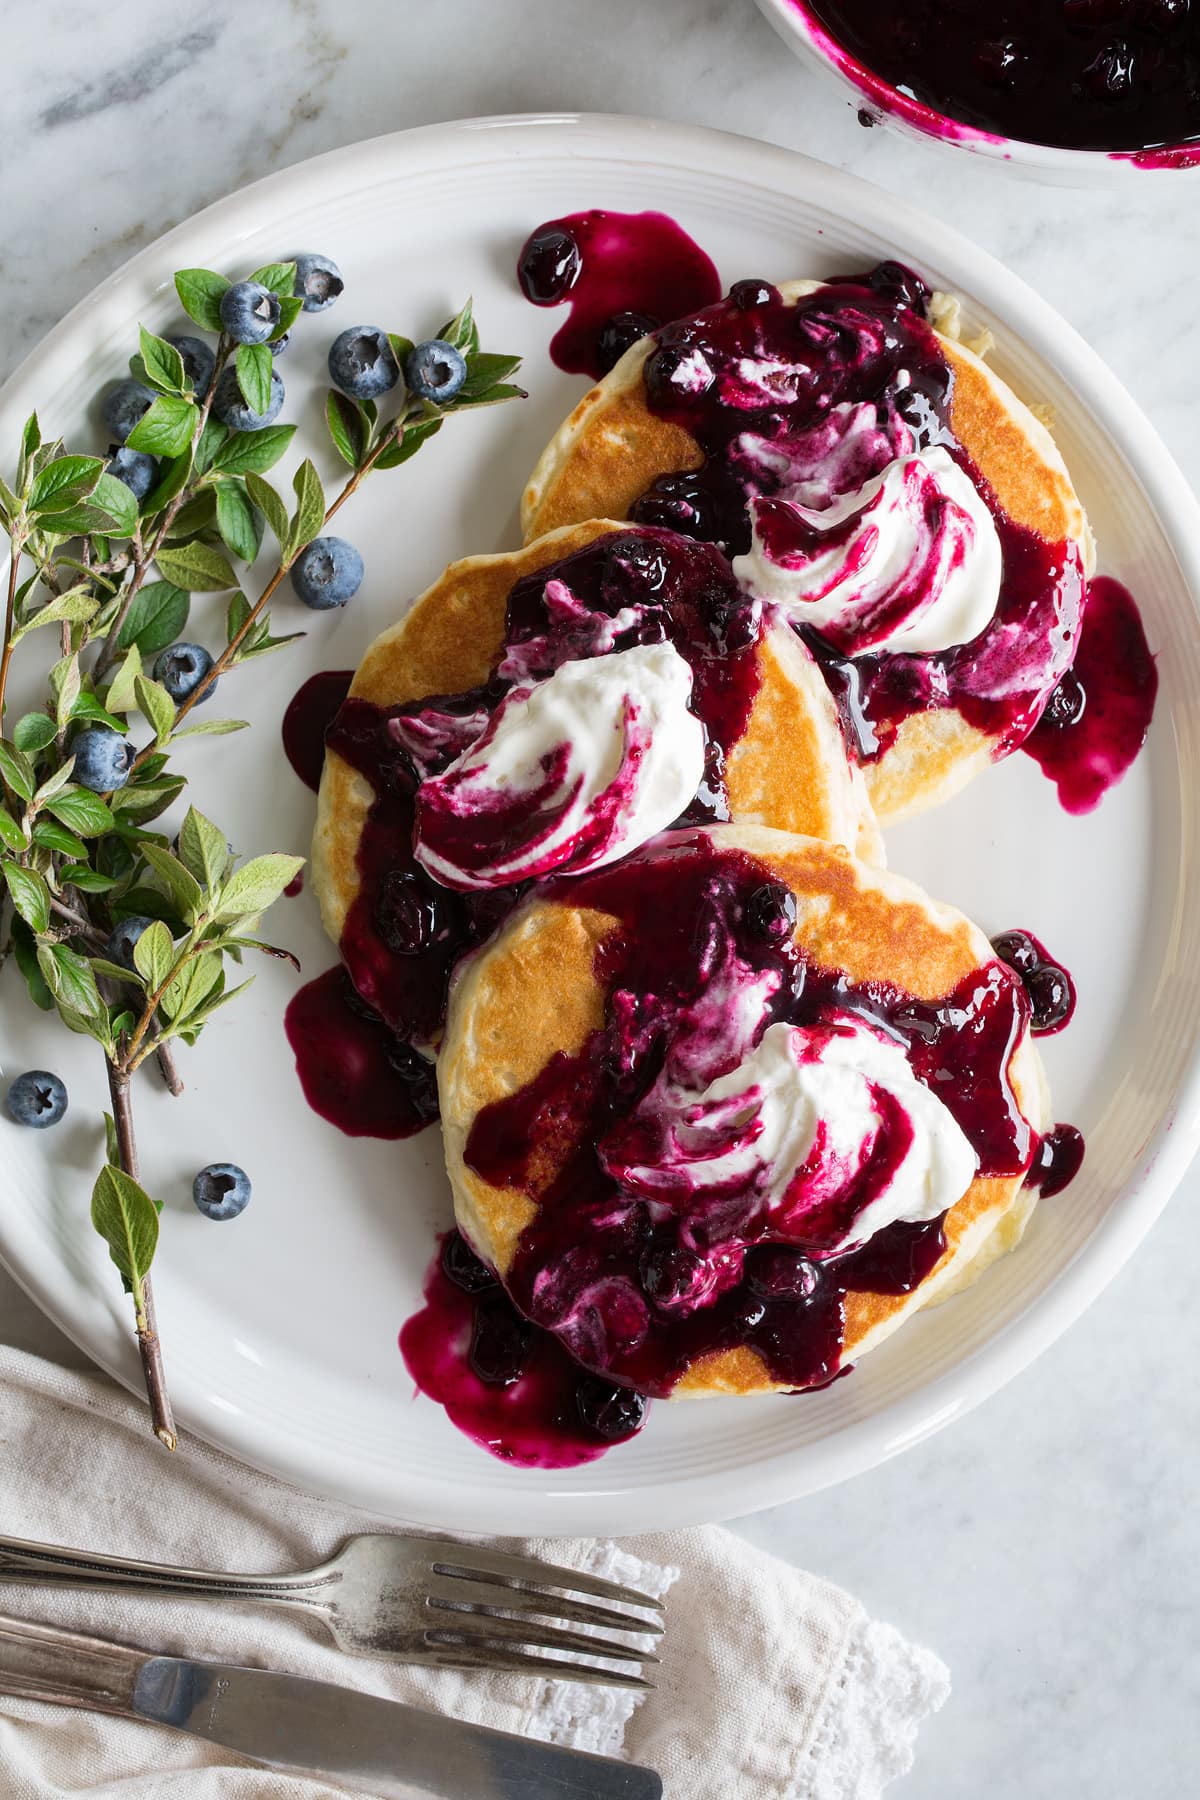 Blueberry syrup shown poured over pancakes with whipped cream on top.